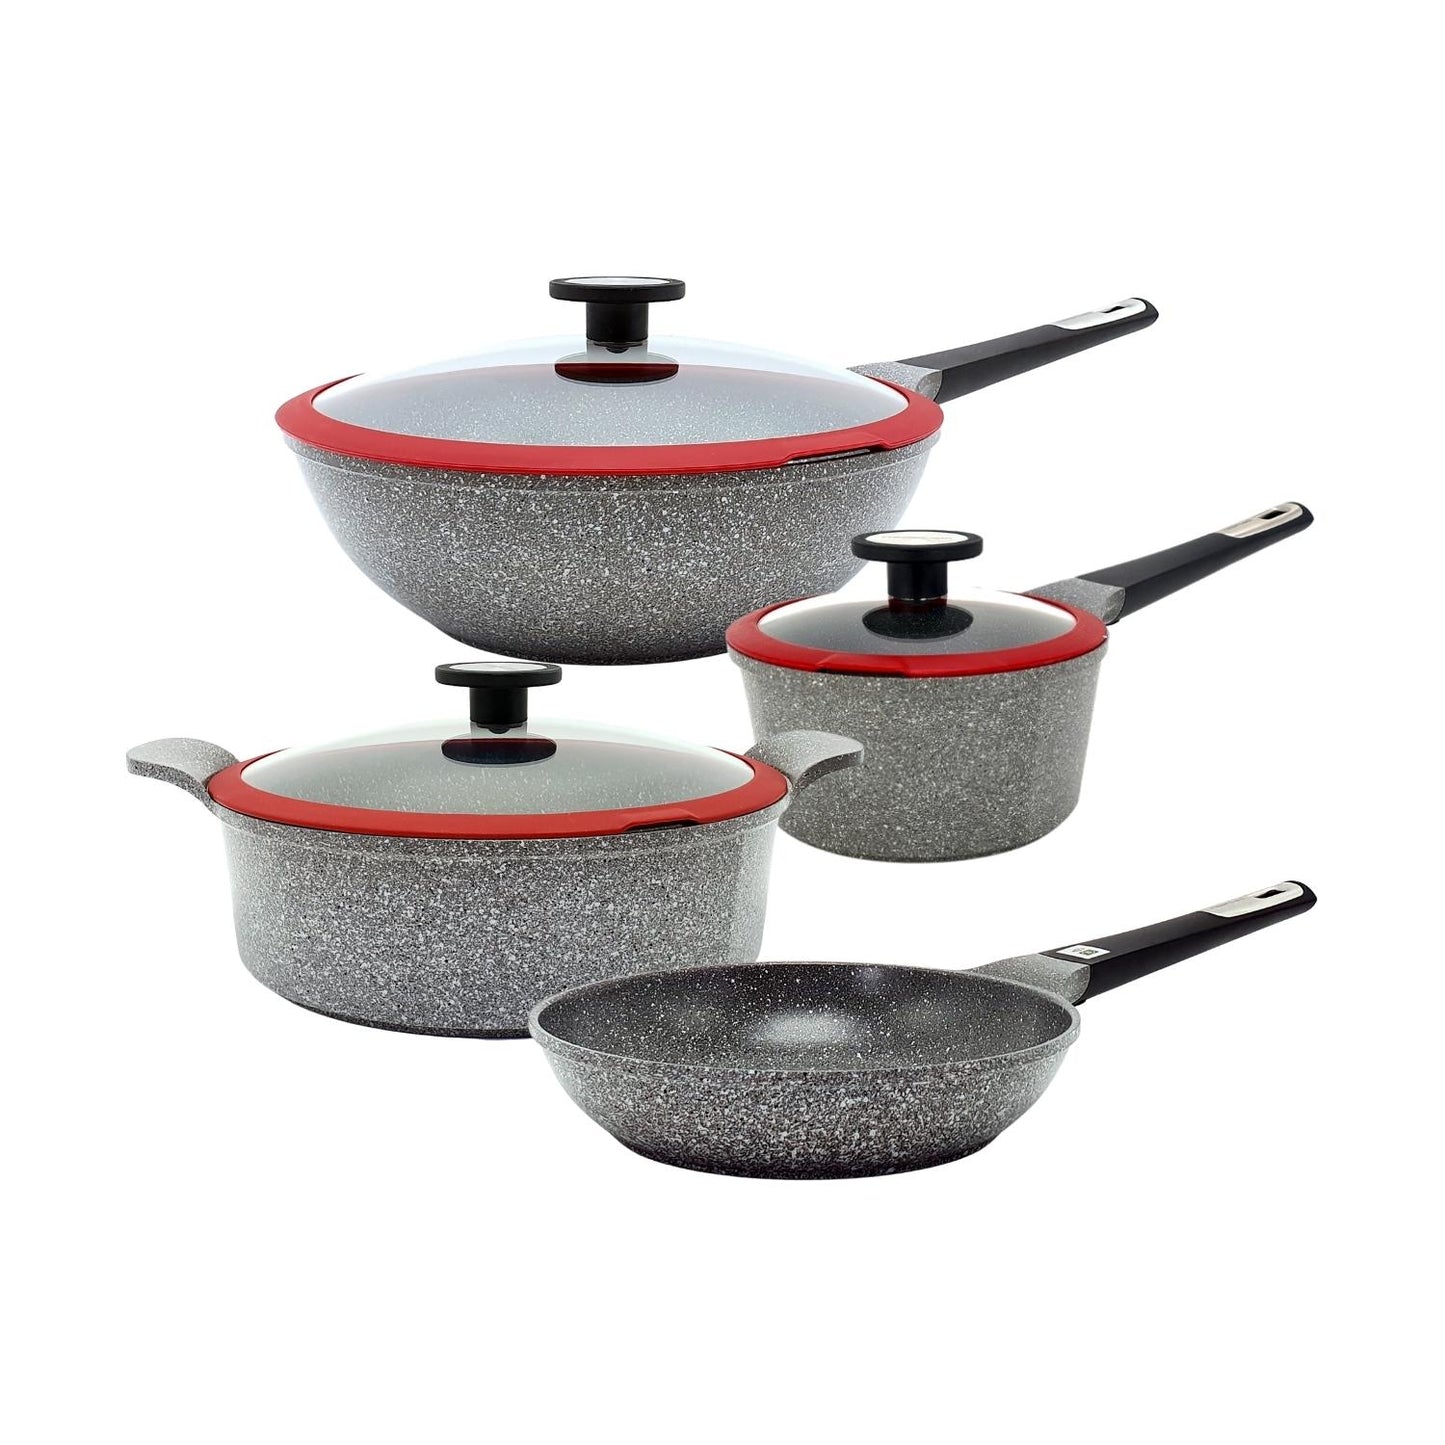 Neoflam Pote Gourmet 7-Piece Cookware Set